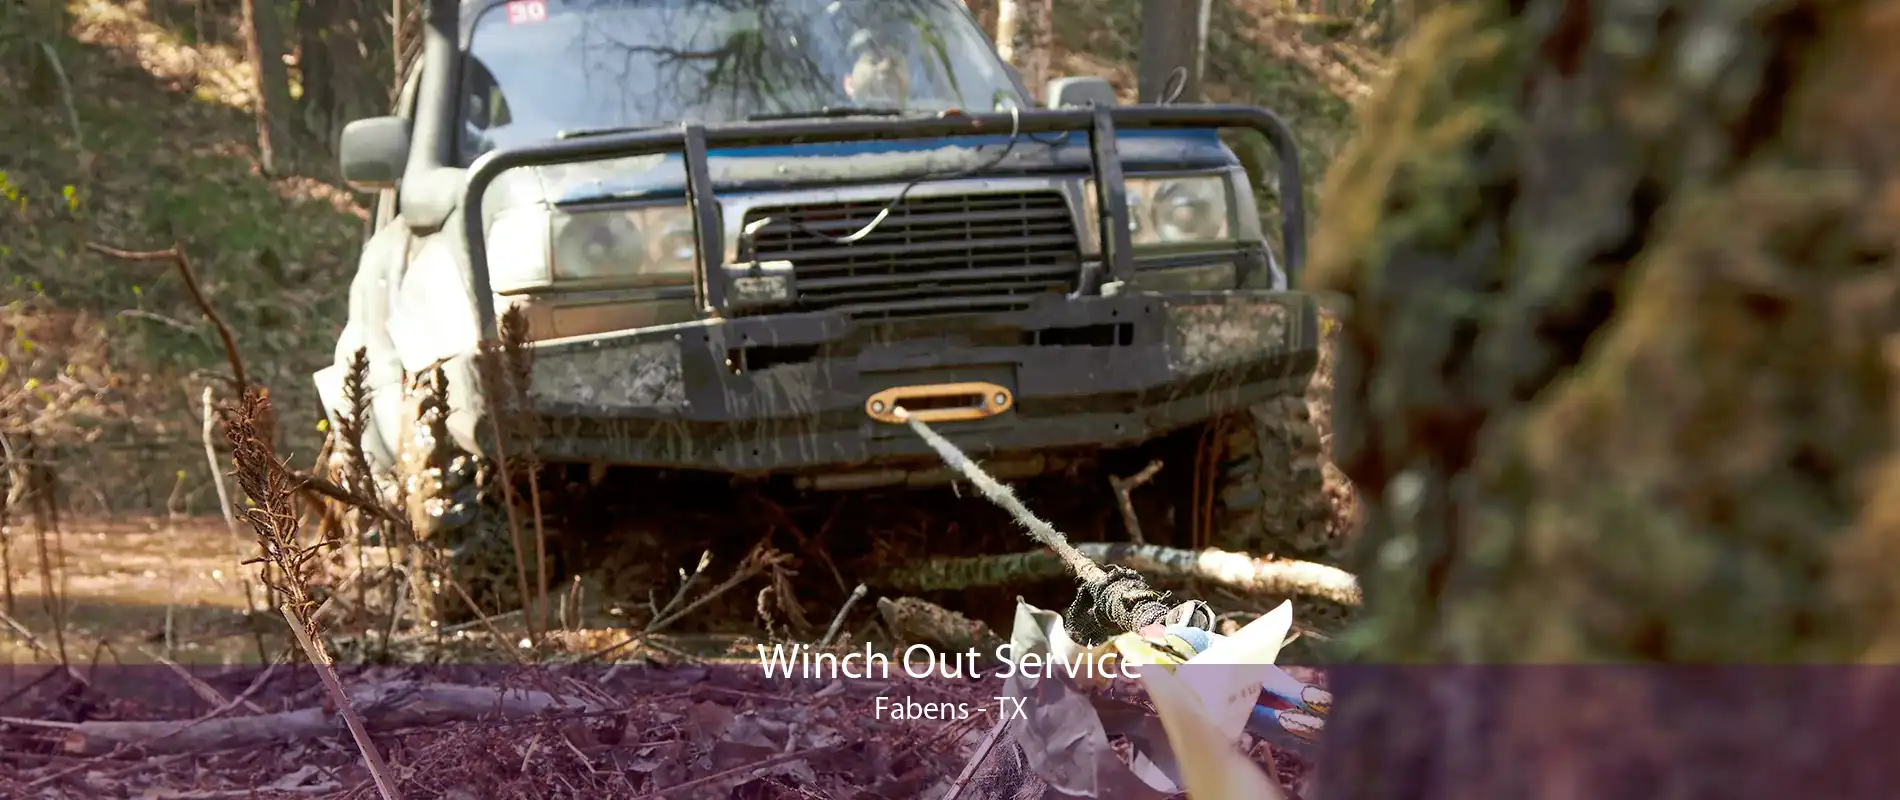 Winch Out Service Fabens - TX